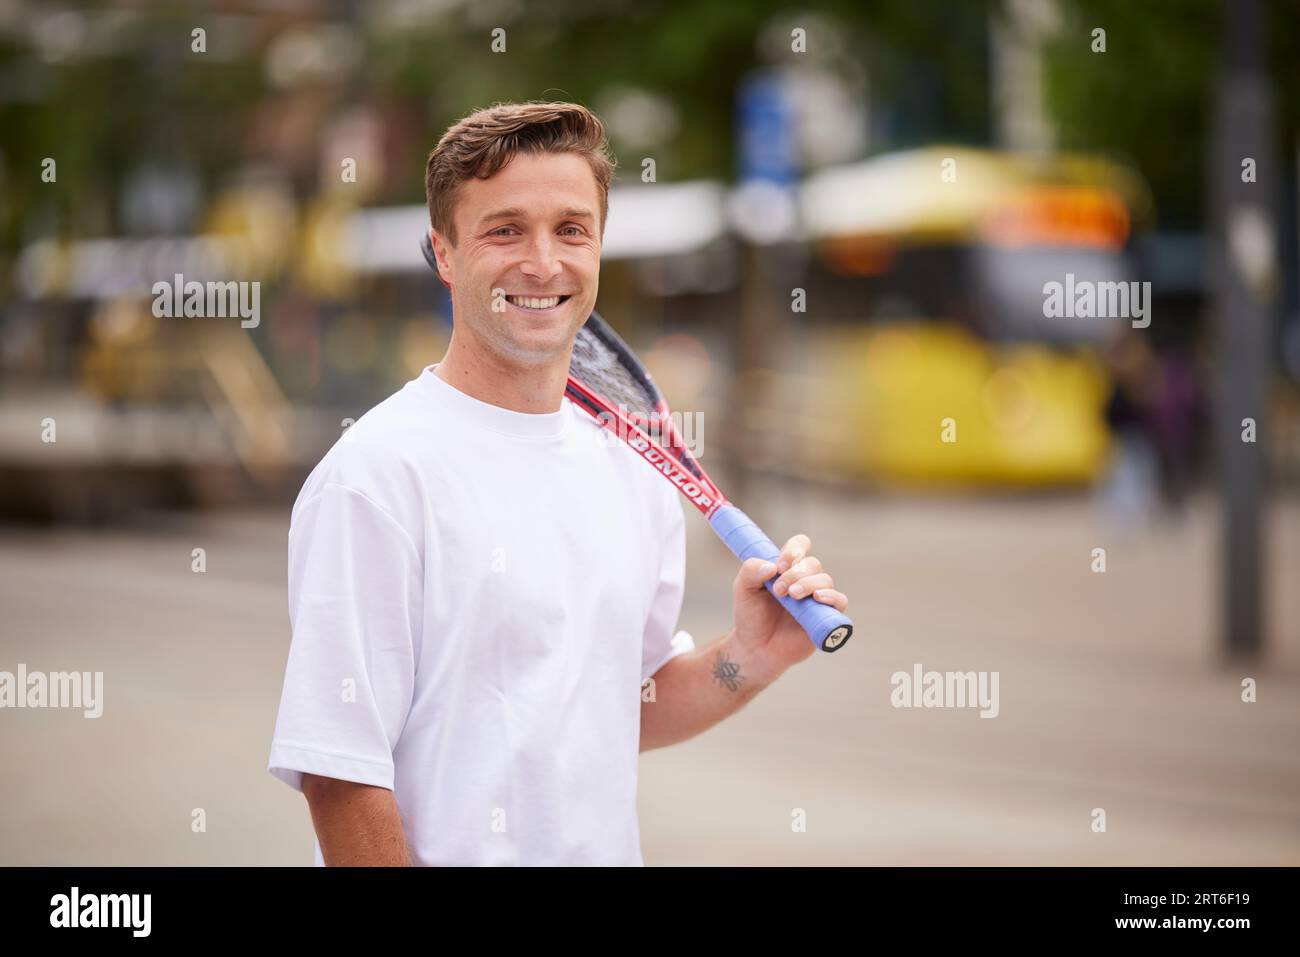 Liam Broady tennis star from Stockport Stock Photo